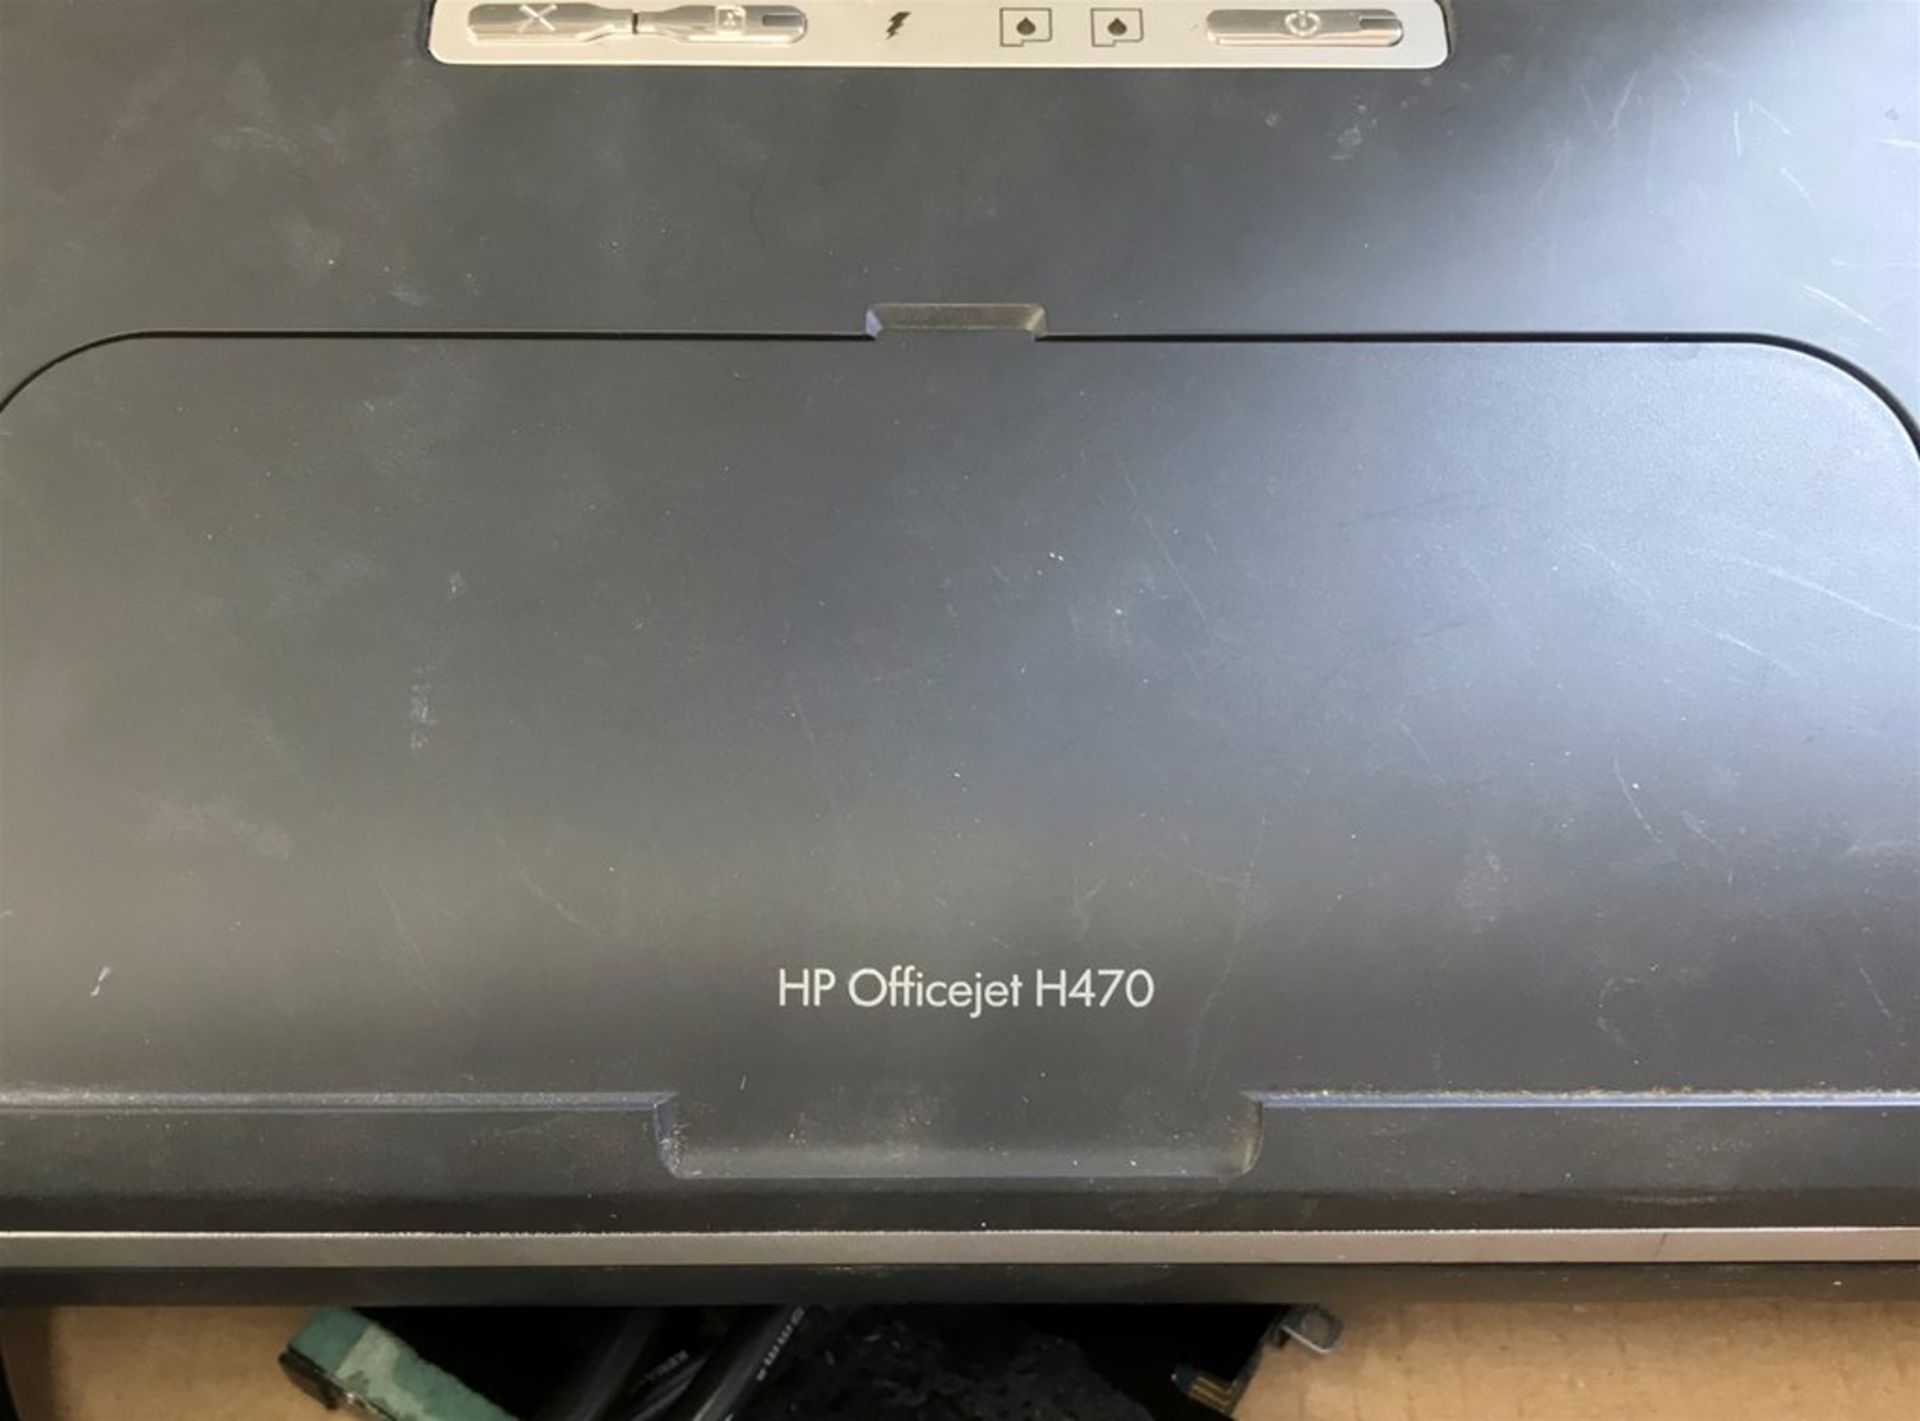 A Quantity I.T. Equipment - HP Officejet H470 With Power Adapter and USB Cable and approx 20 PC Mice - Image 2 of 3